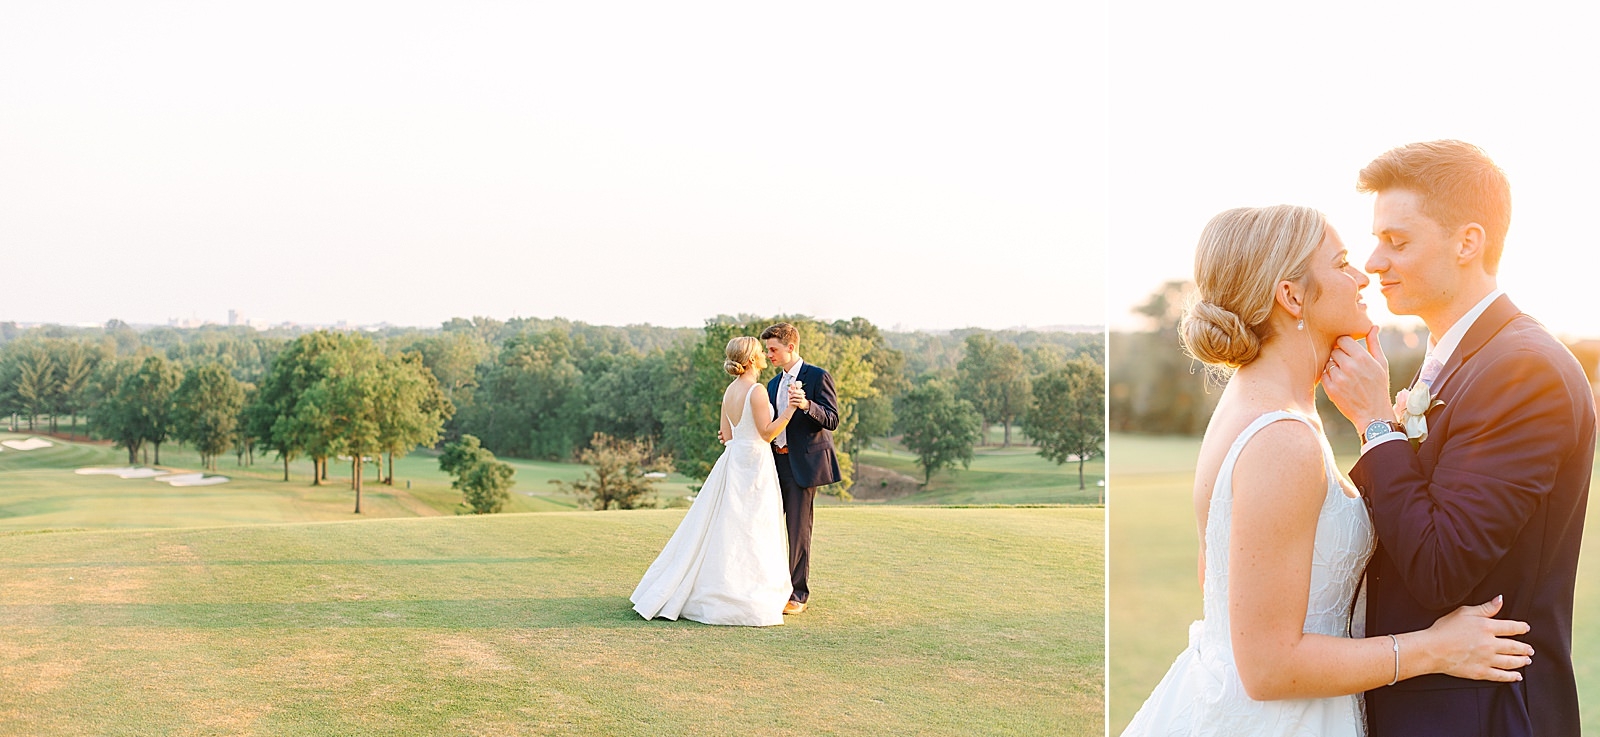 An Evansville Country Club Wedding | Ashley and Beau | Bret and Brandie Photography224.jpg